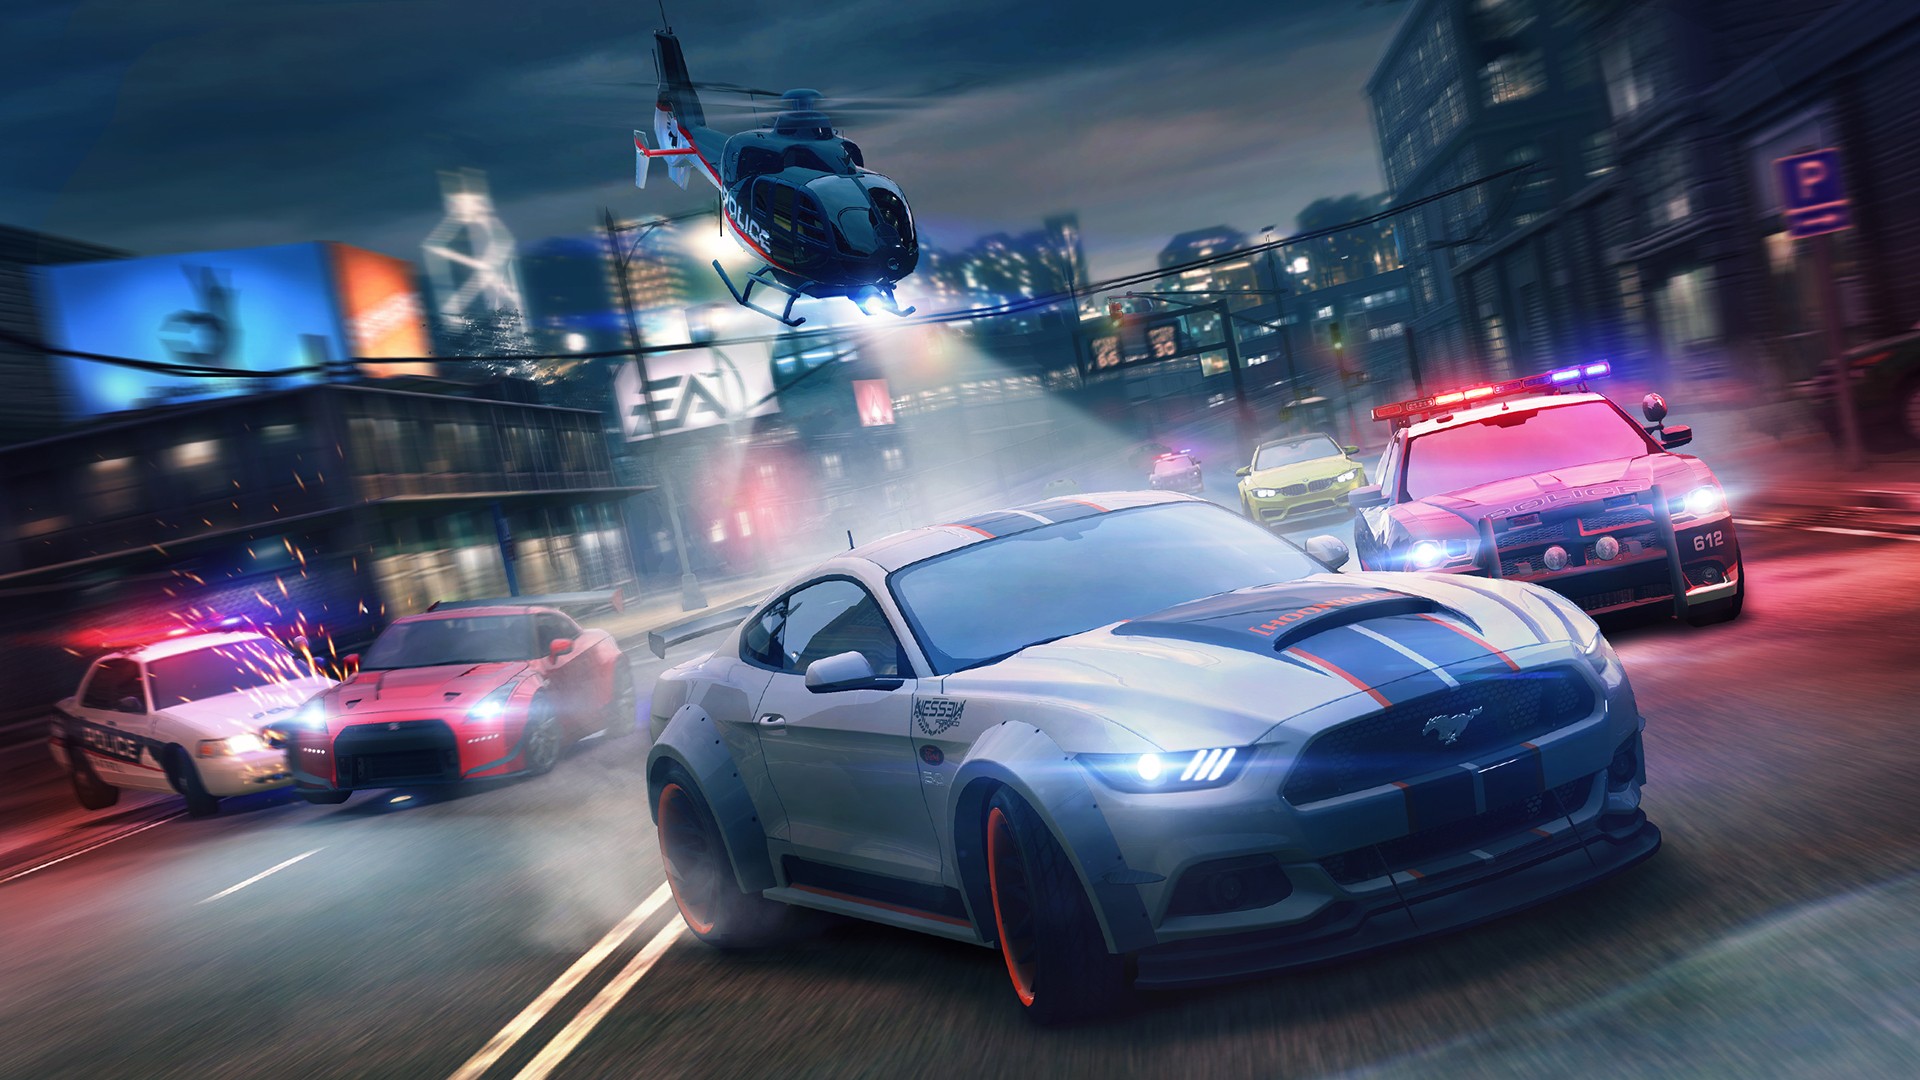 441892 Need For Speed No Limits Video Games Night City Ford Mustang GT Nissan GT R BMW M4 Police Cars Tuning Motion Blur Need For Speed 